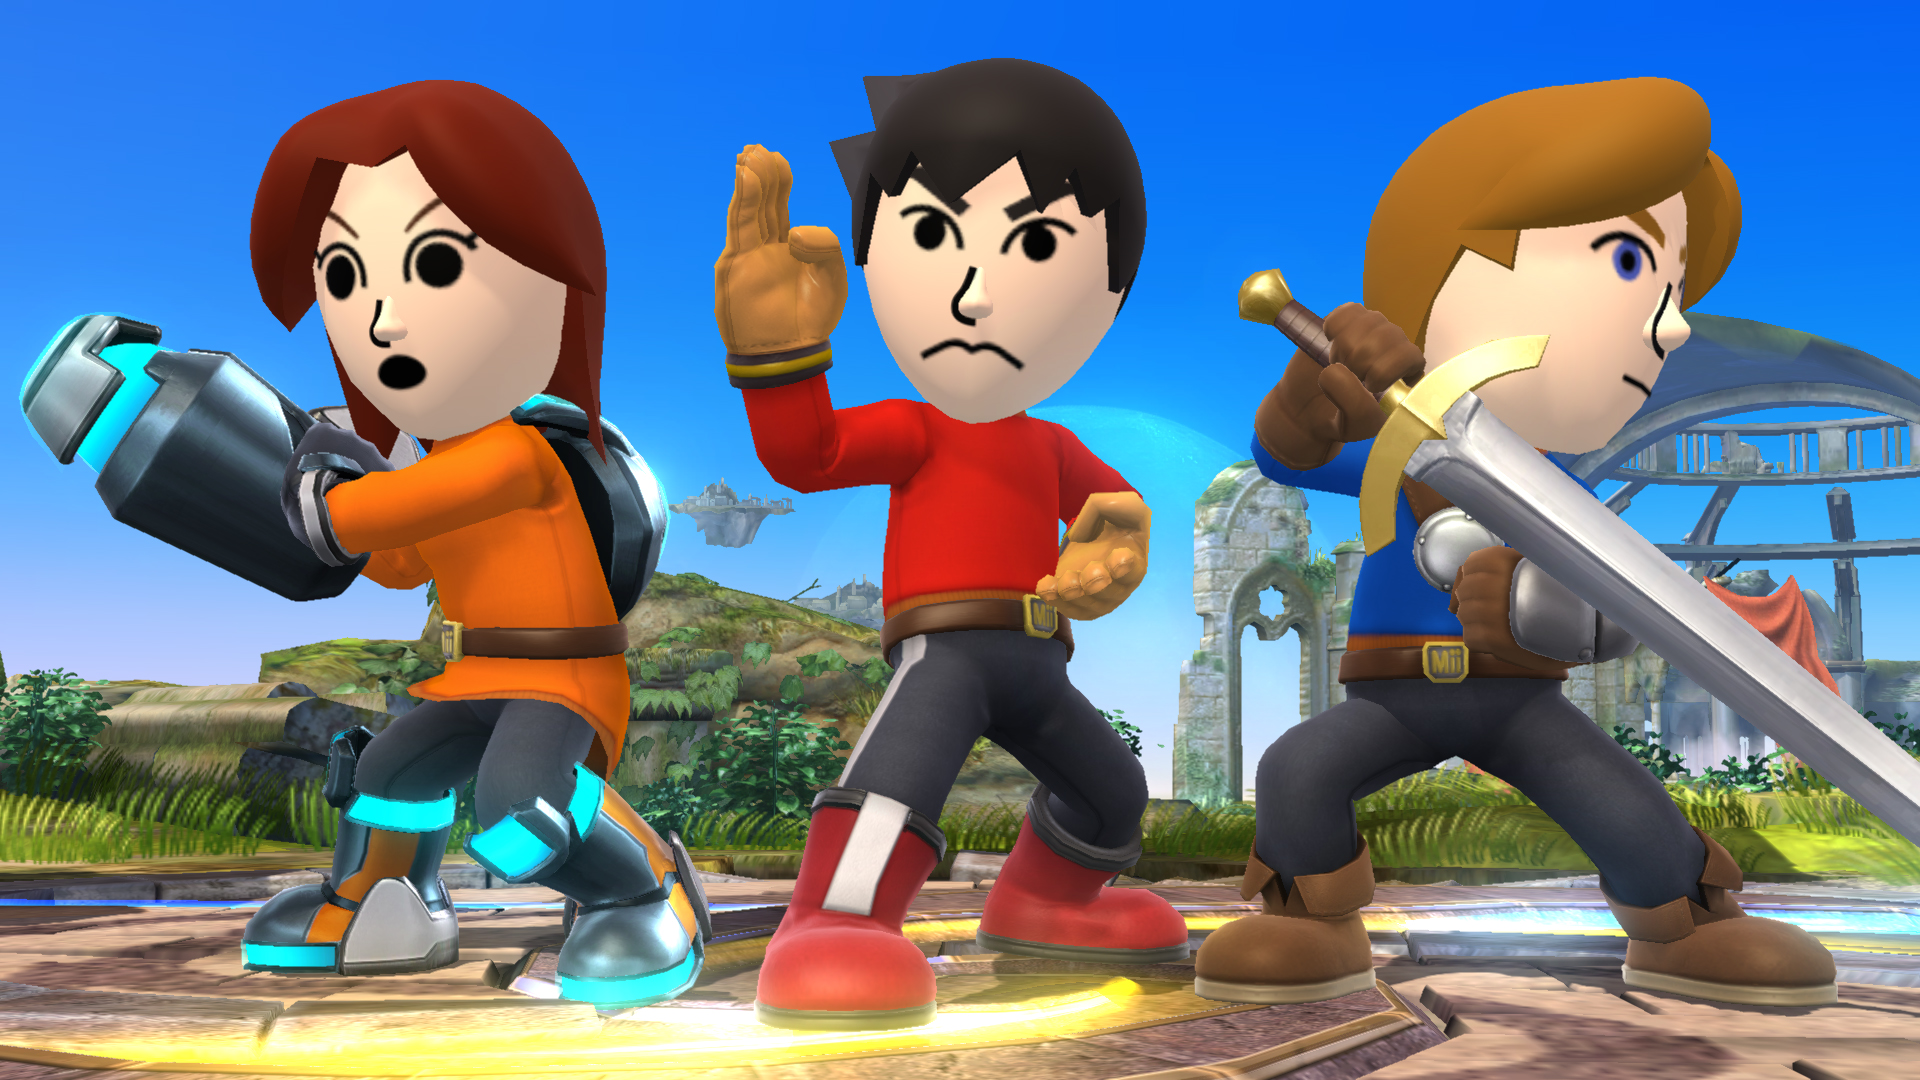 Challenger approaching: mii fighters announced for super smash bros.